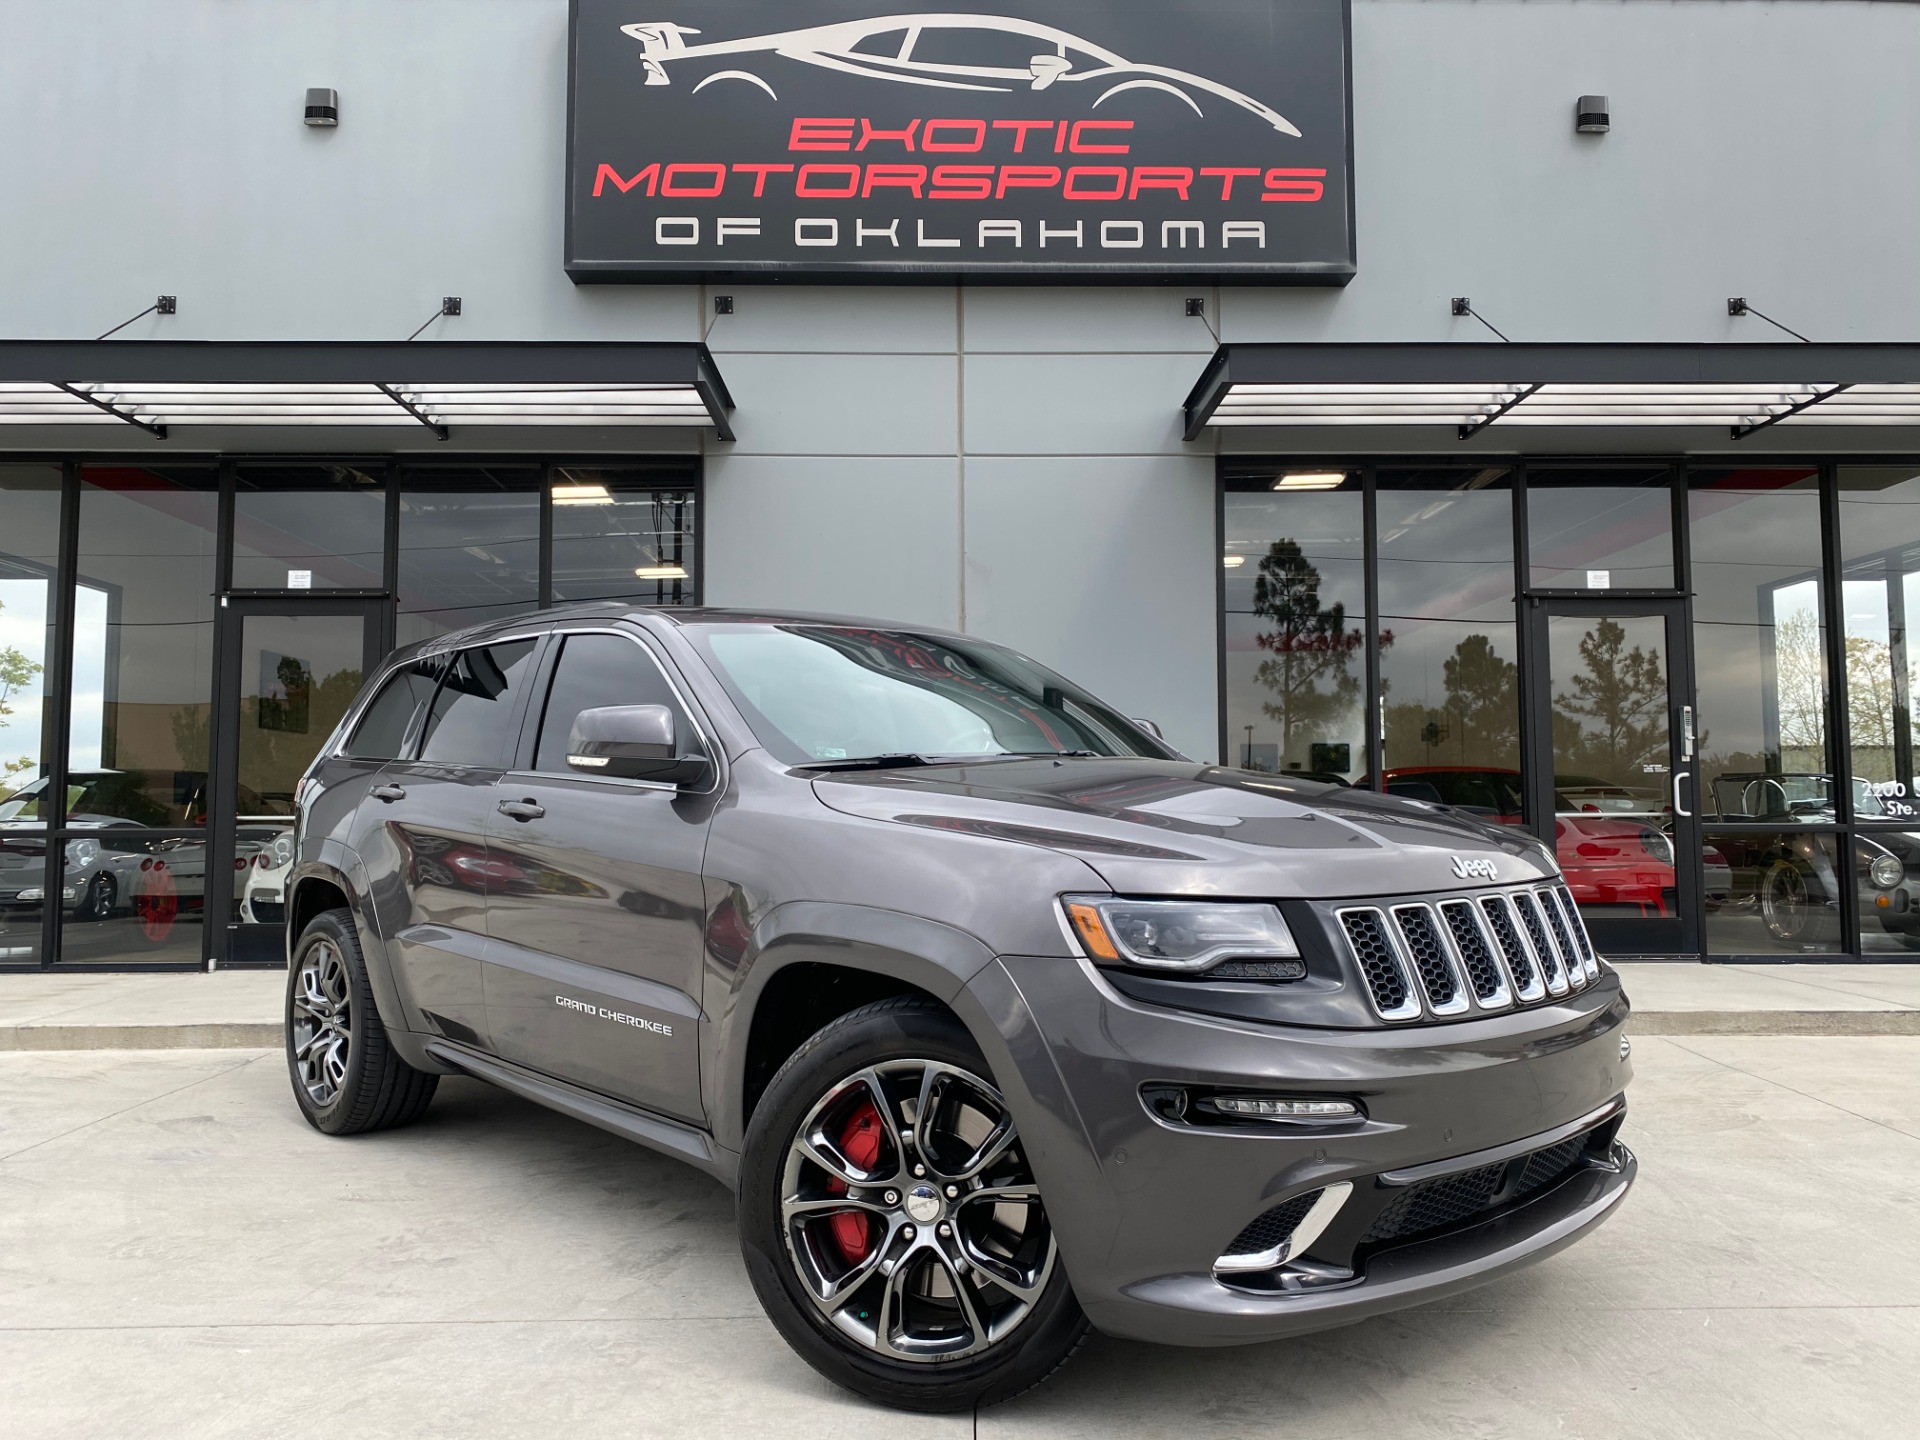 Used 15 Jeep Grand Cherokee Srt For Sale Sold Exotic Motorsports Of Oklahoma Stock C273 2